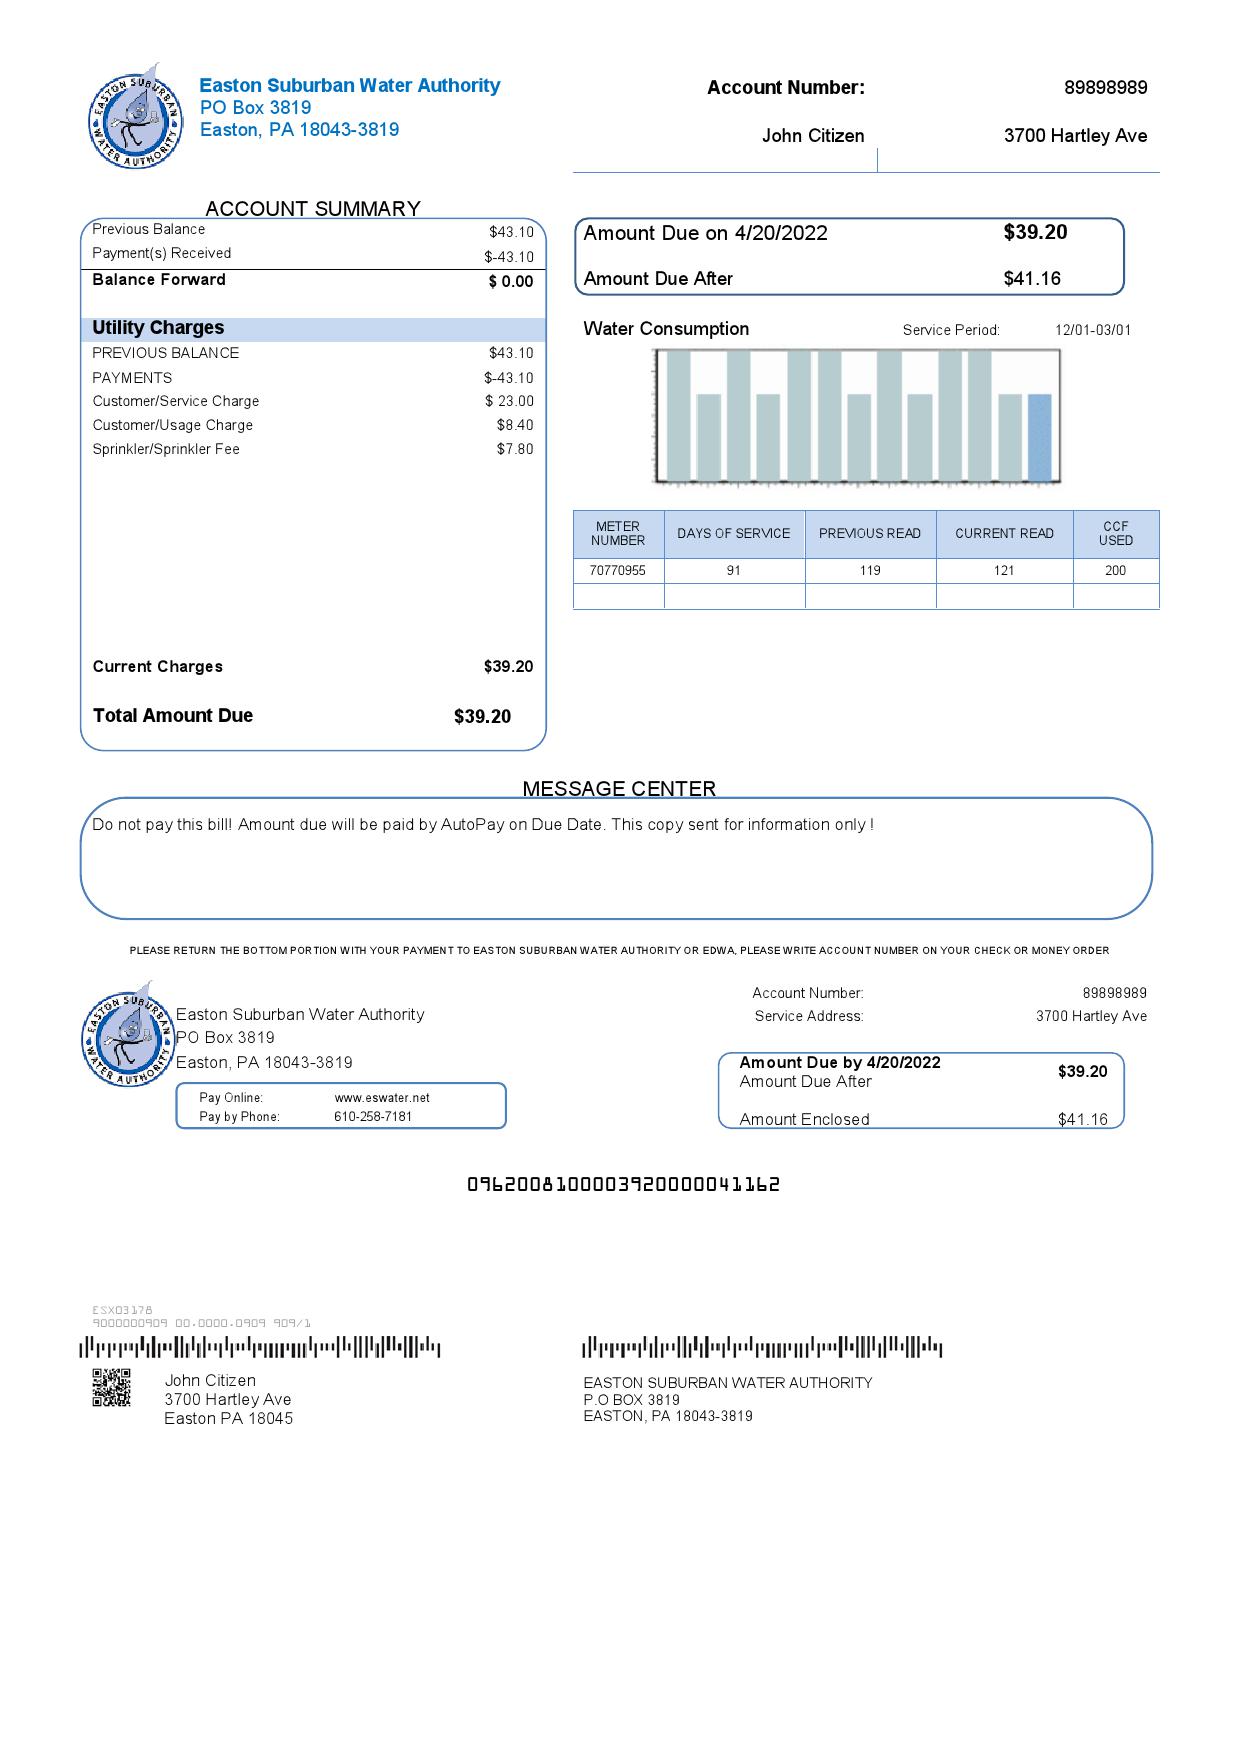 USA Eastern Suburban Water Authority utility bill template in Word and PDF format